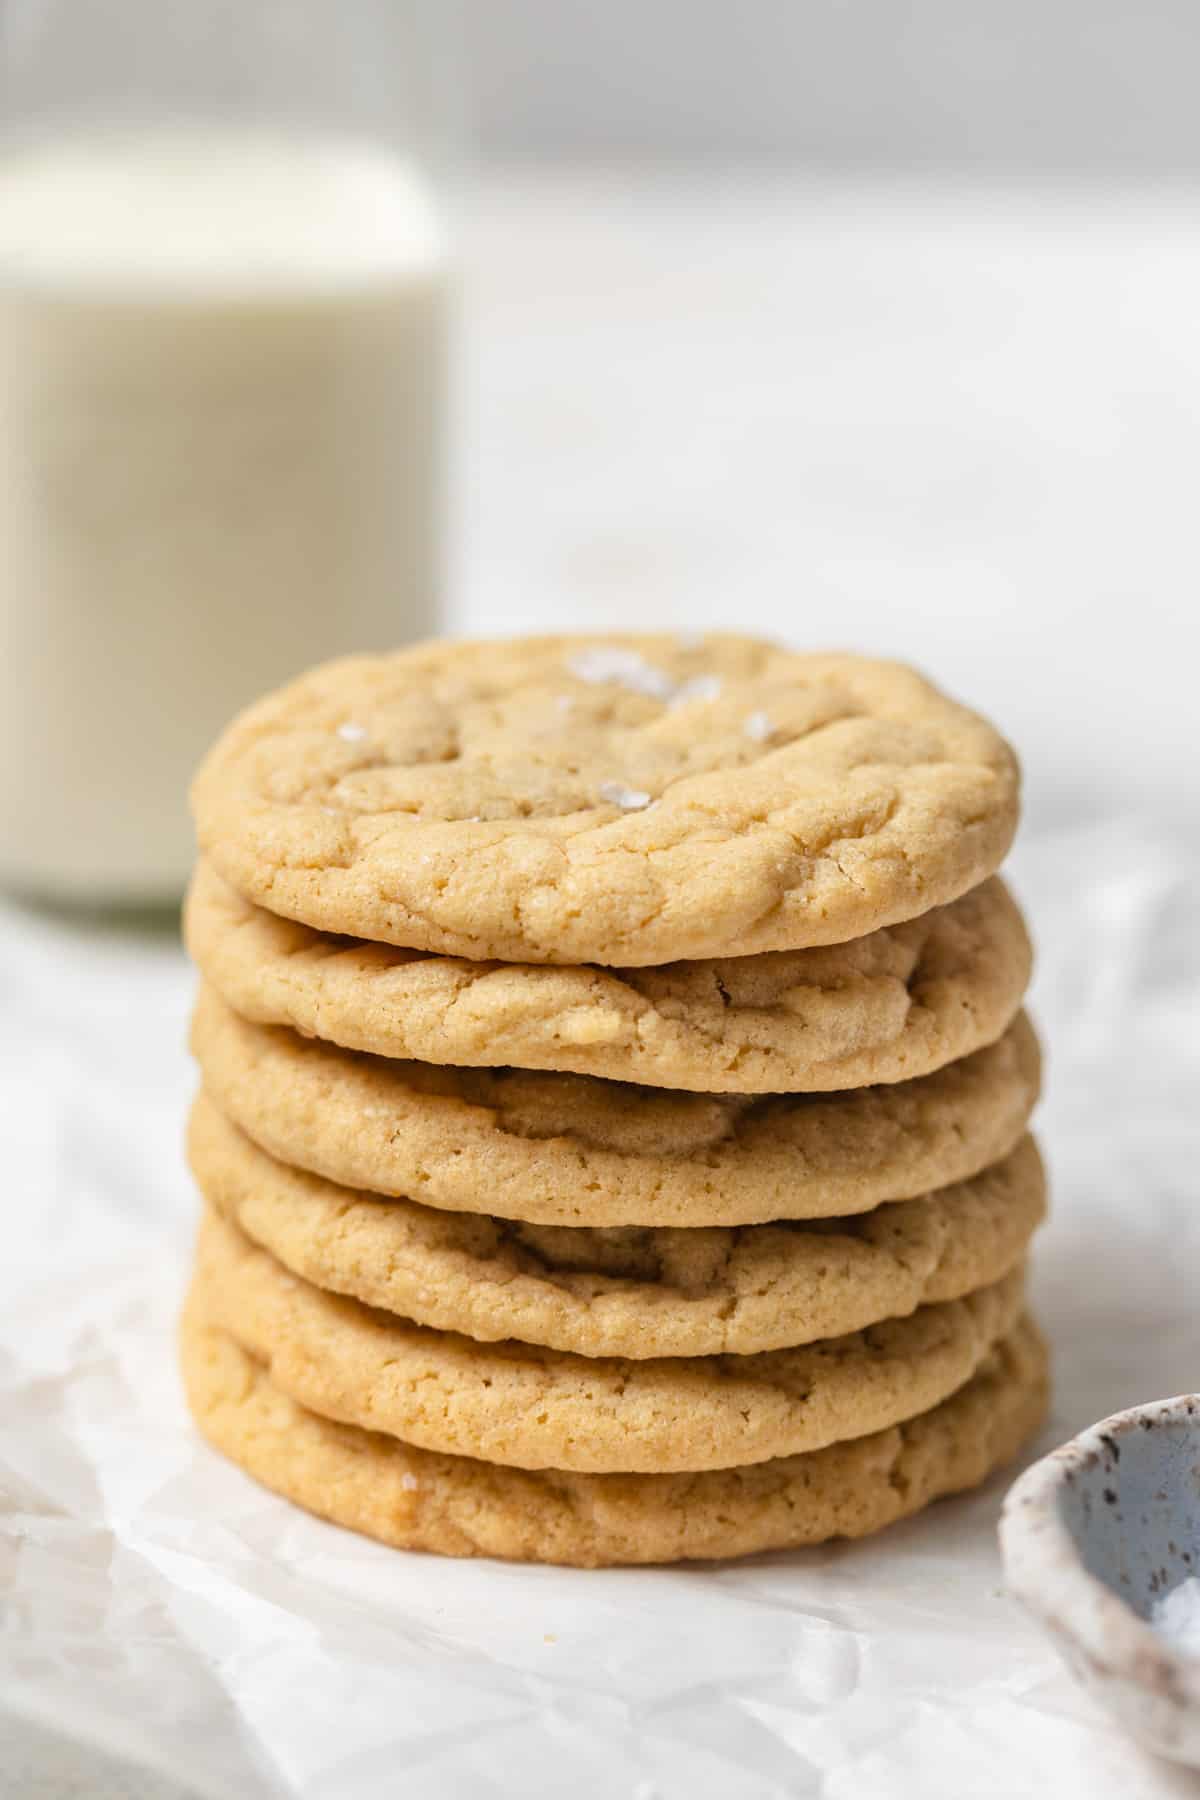 A stack of cookies on parchment paper with a glass of milk in the background.